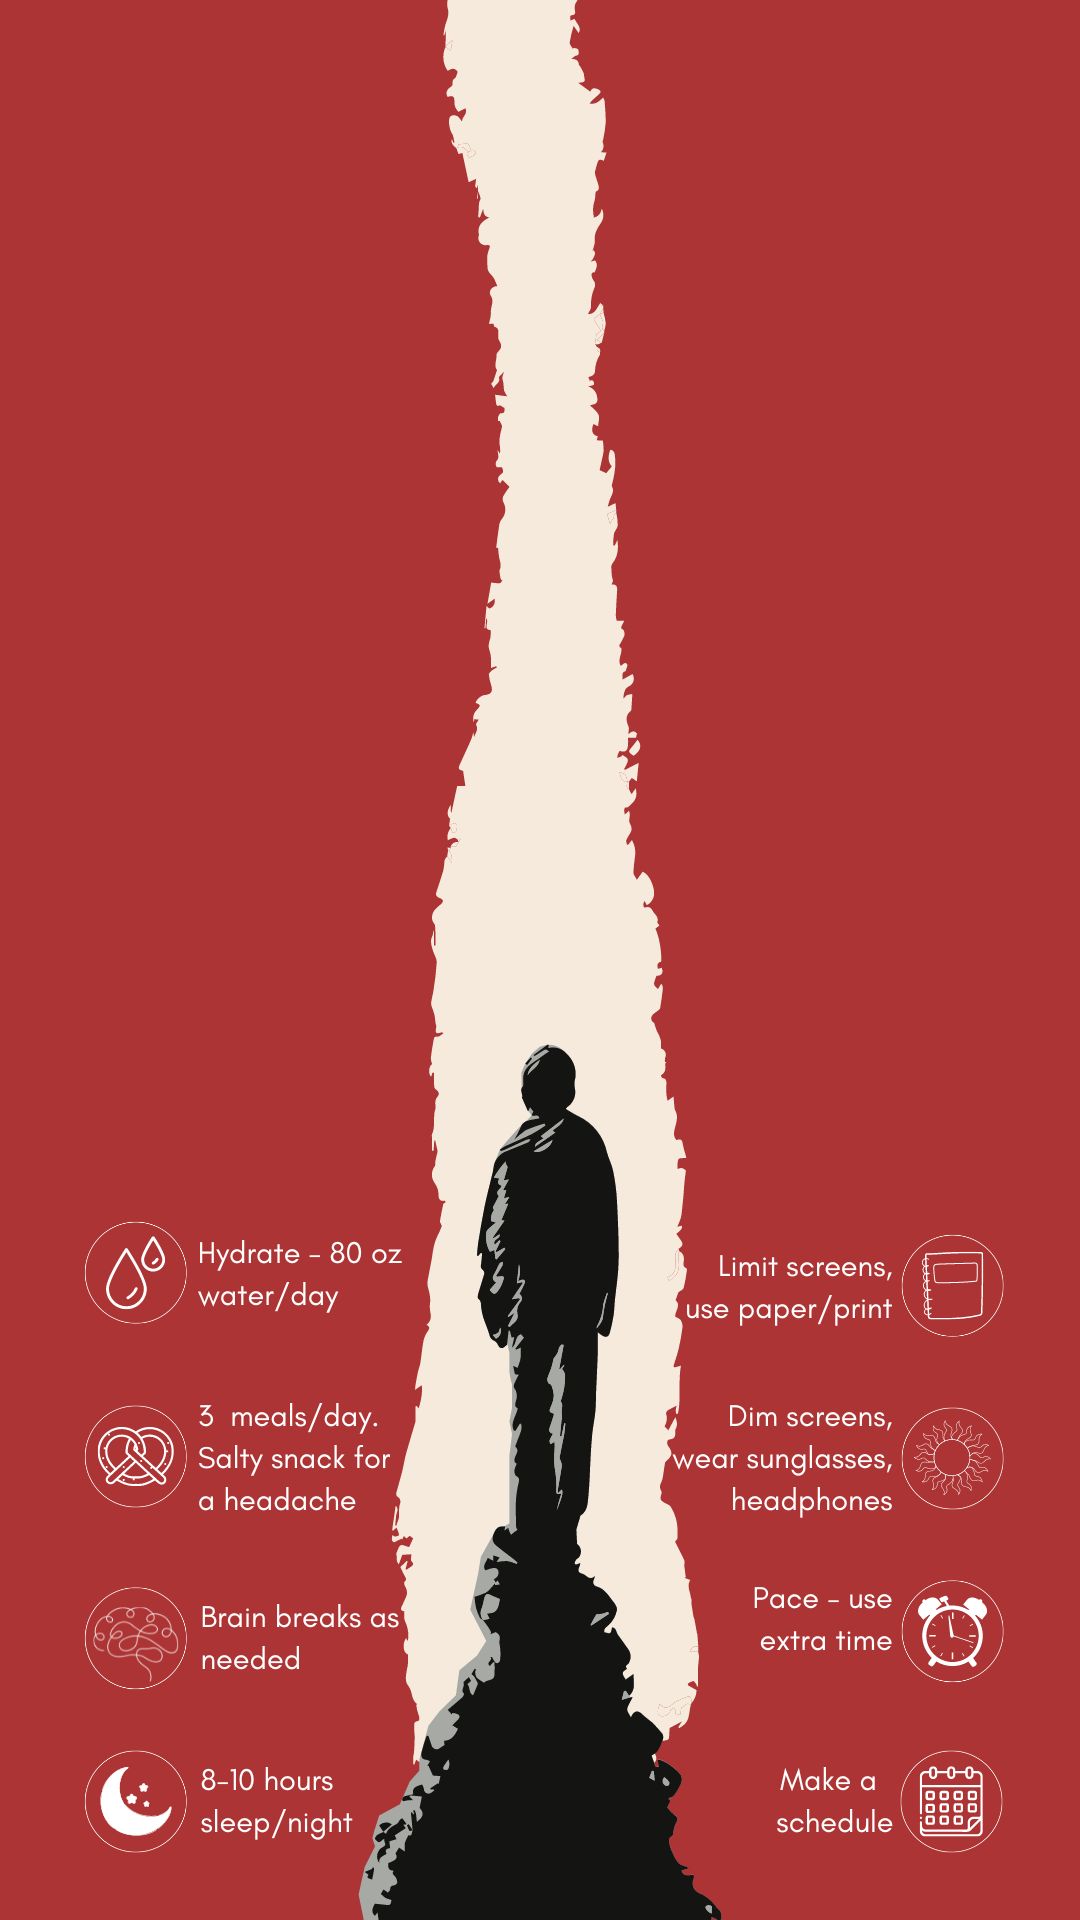 A black silhouette stands in a white light between red sides. On each side of the silhouette are concussion treatment tips in white text. The treatment tips include hydrate (80 oz. water/day). Eat 3 balanced meals/day, salt snack for headache. Brain breaks as needed, Sleep time (8-10 hrs/night). Limit screens, use paper/print. Dim screens. wear sunglasses, headphones, earbuds. Pace - use extra time. Pace yourself. Make a schedule.